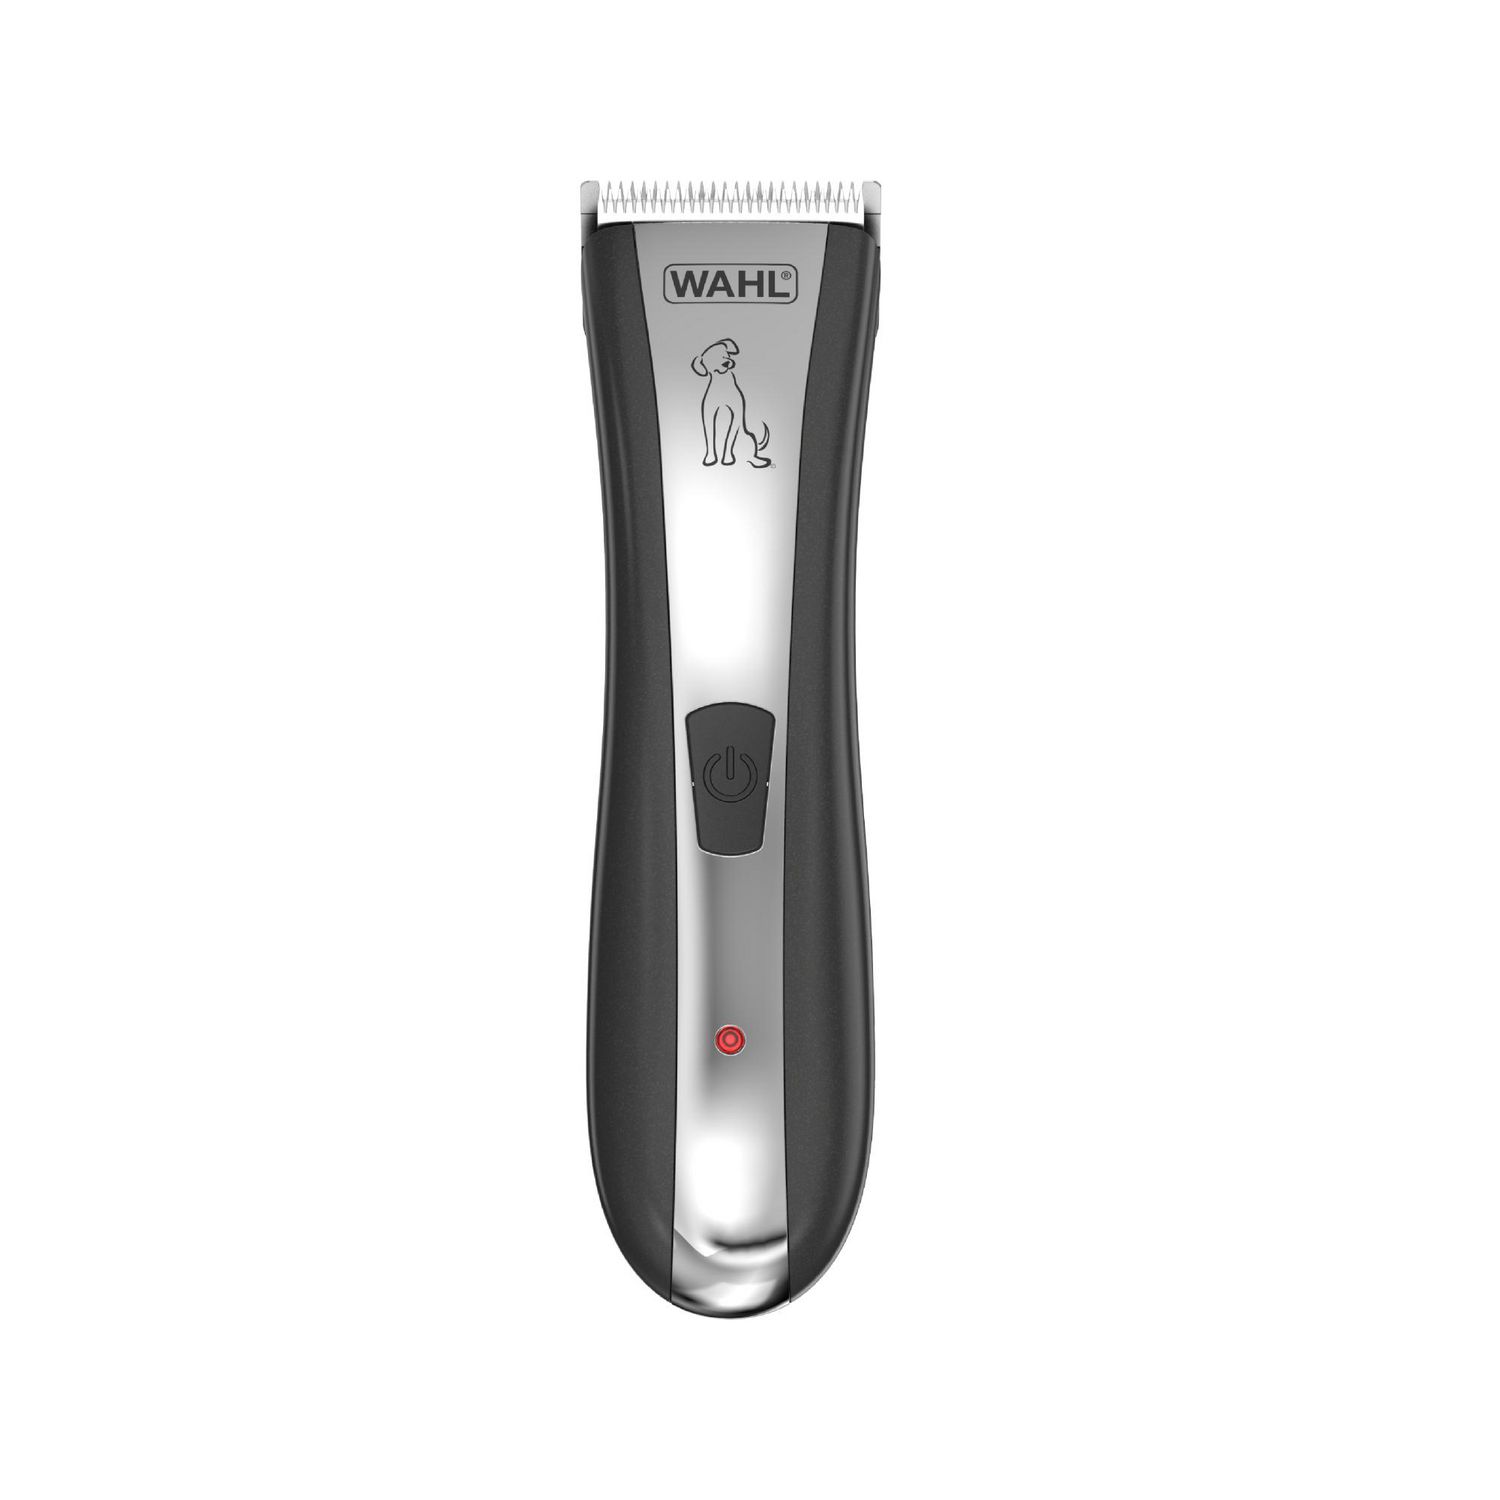 Wahl Lithium Home Pet Dog Clipper Kit, Cord/Cordless Lithium power